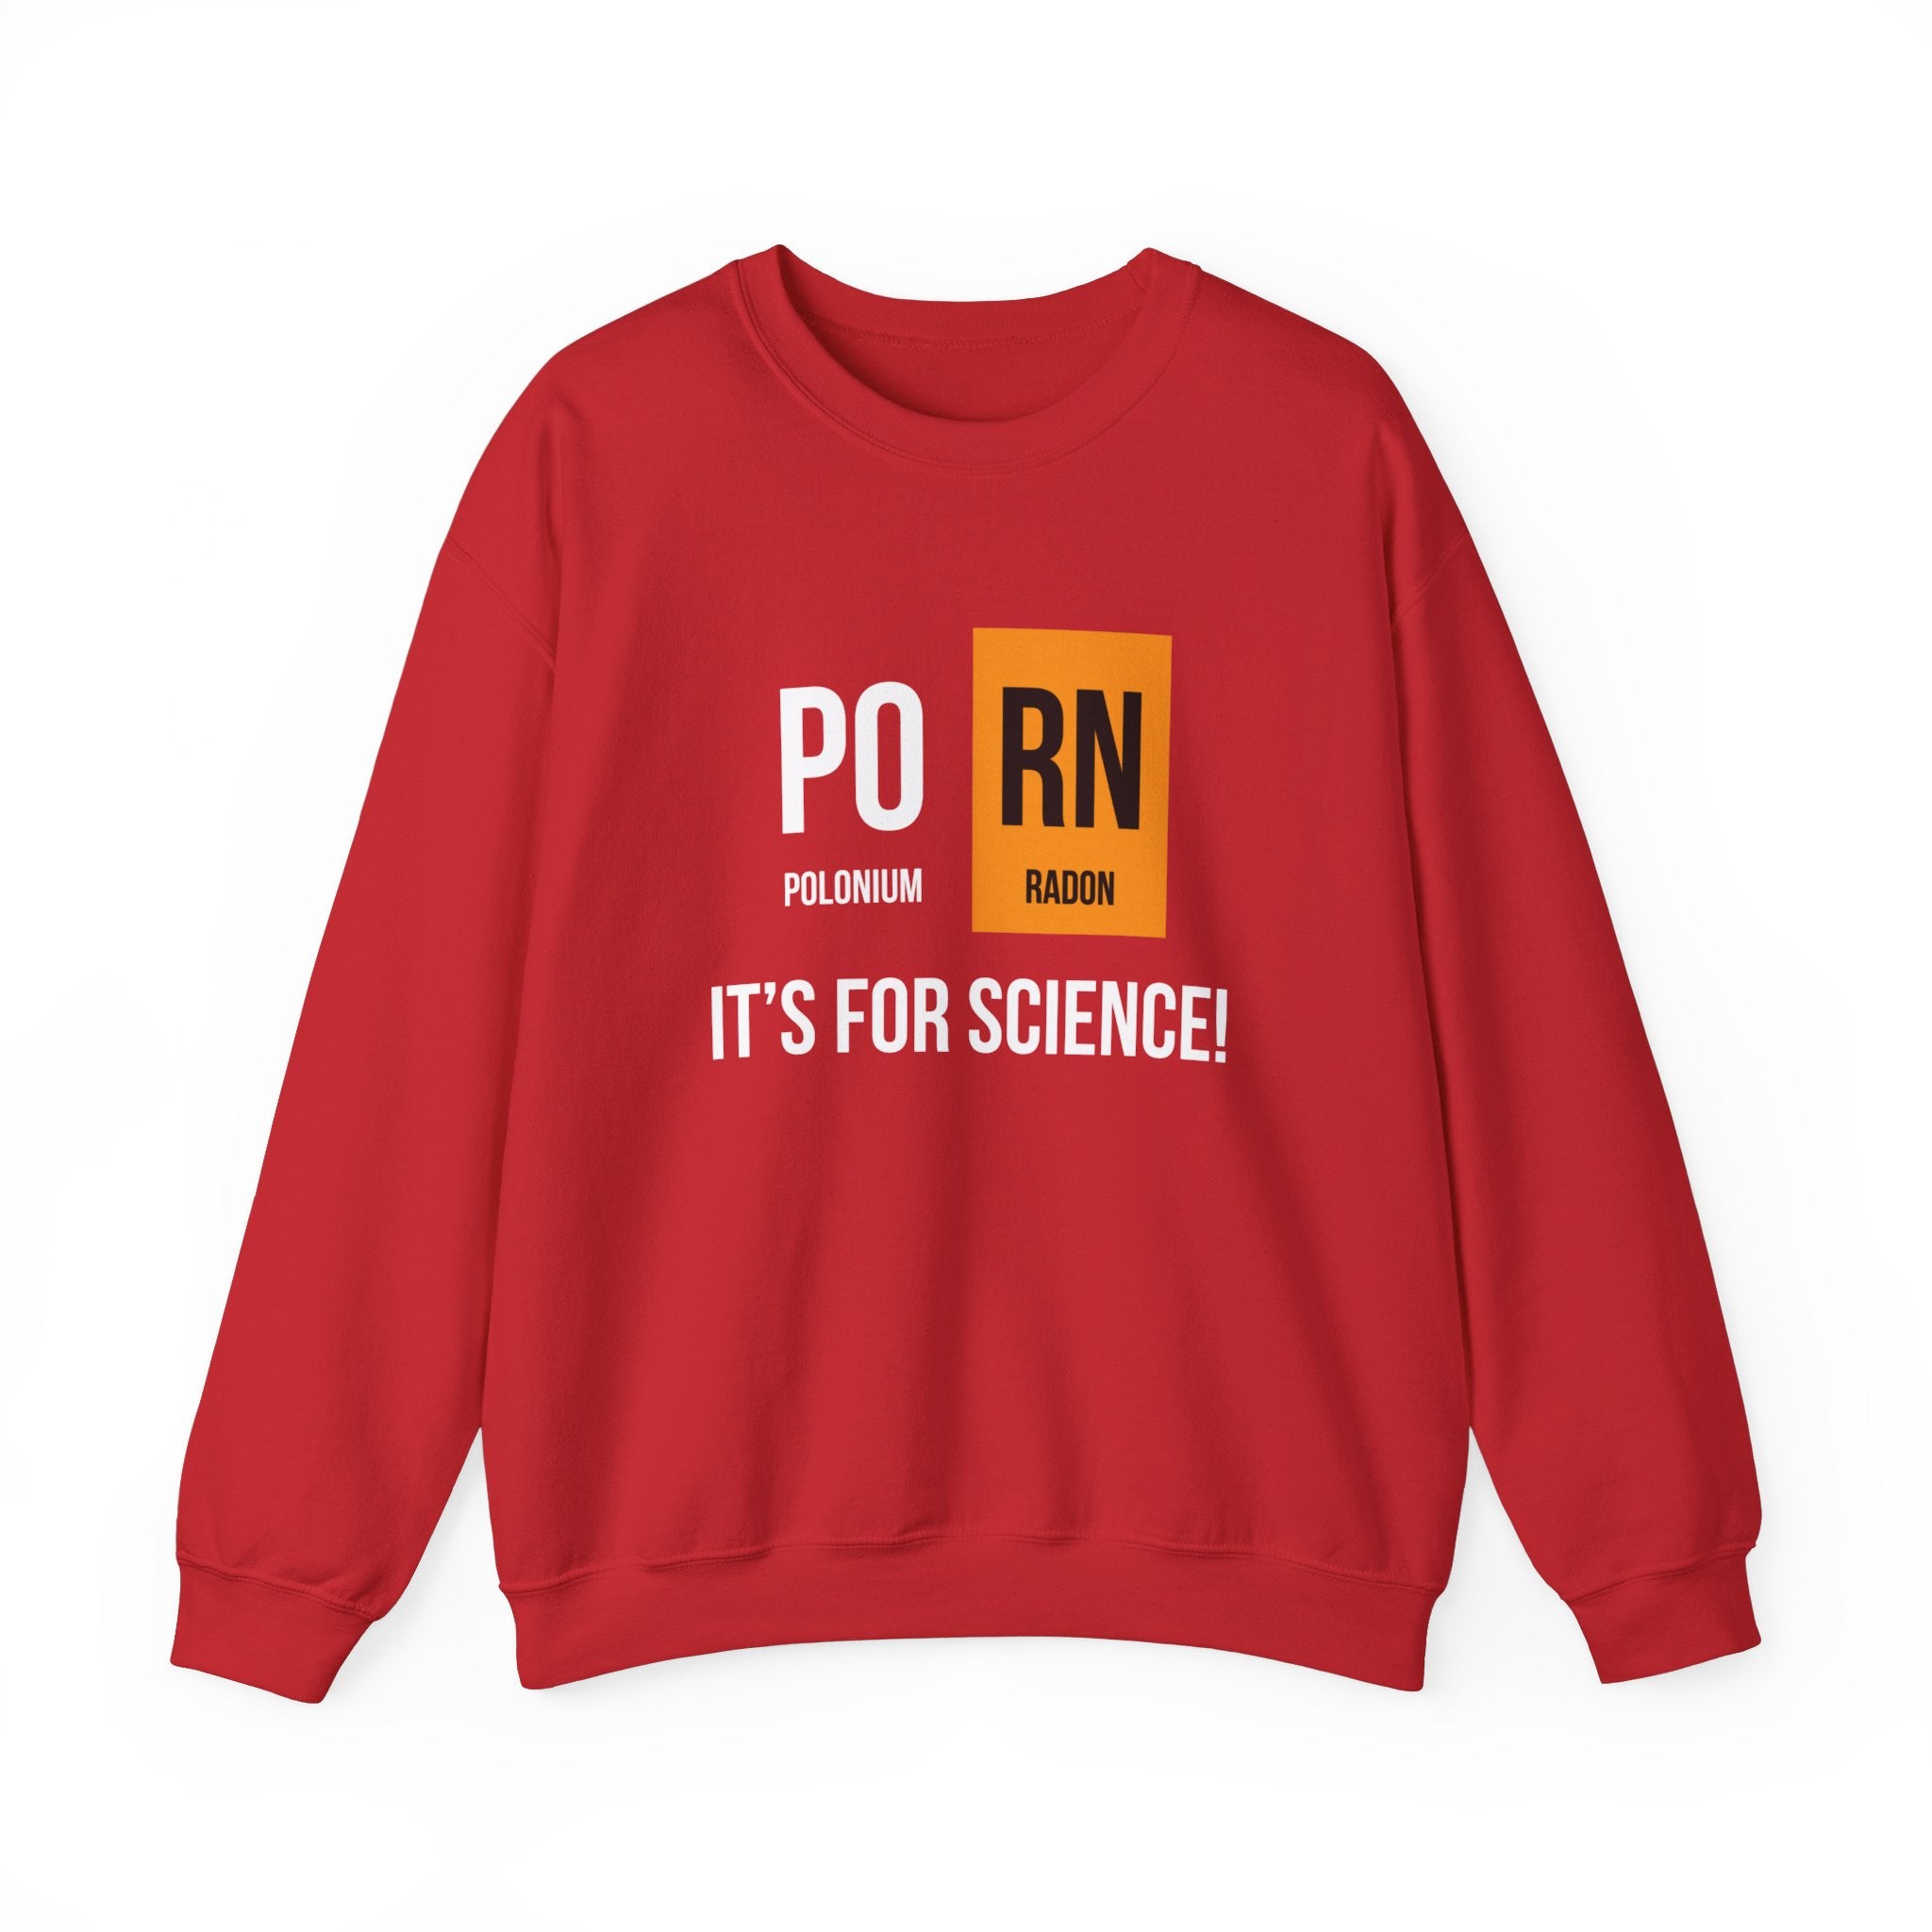 A red sweater displays the chemical elements Polonium (Po) and Radon (Rn) from the periodic table with the text "It's for Science!" below. This PO-RN Sweatshirt is the perfect choice for colder months.